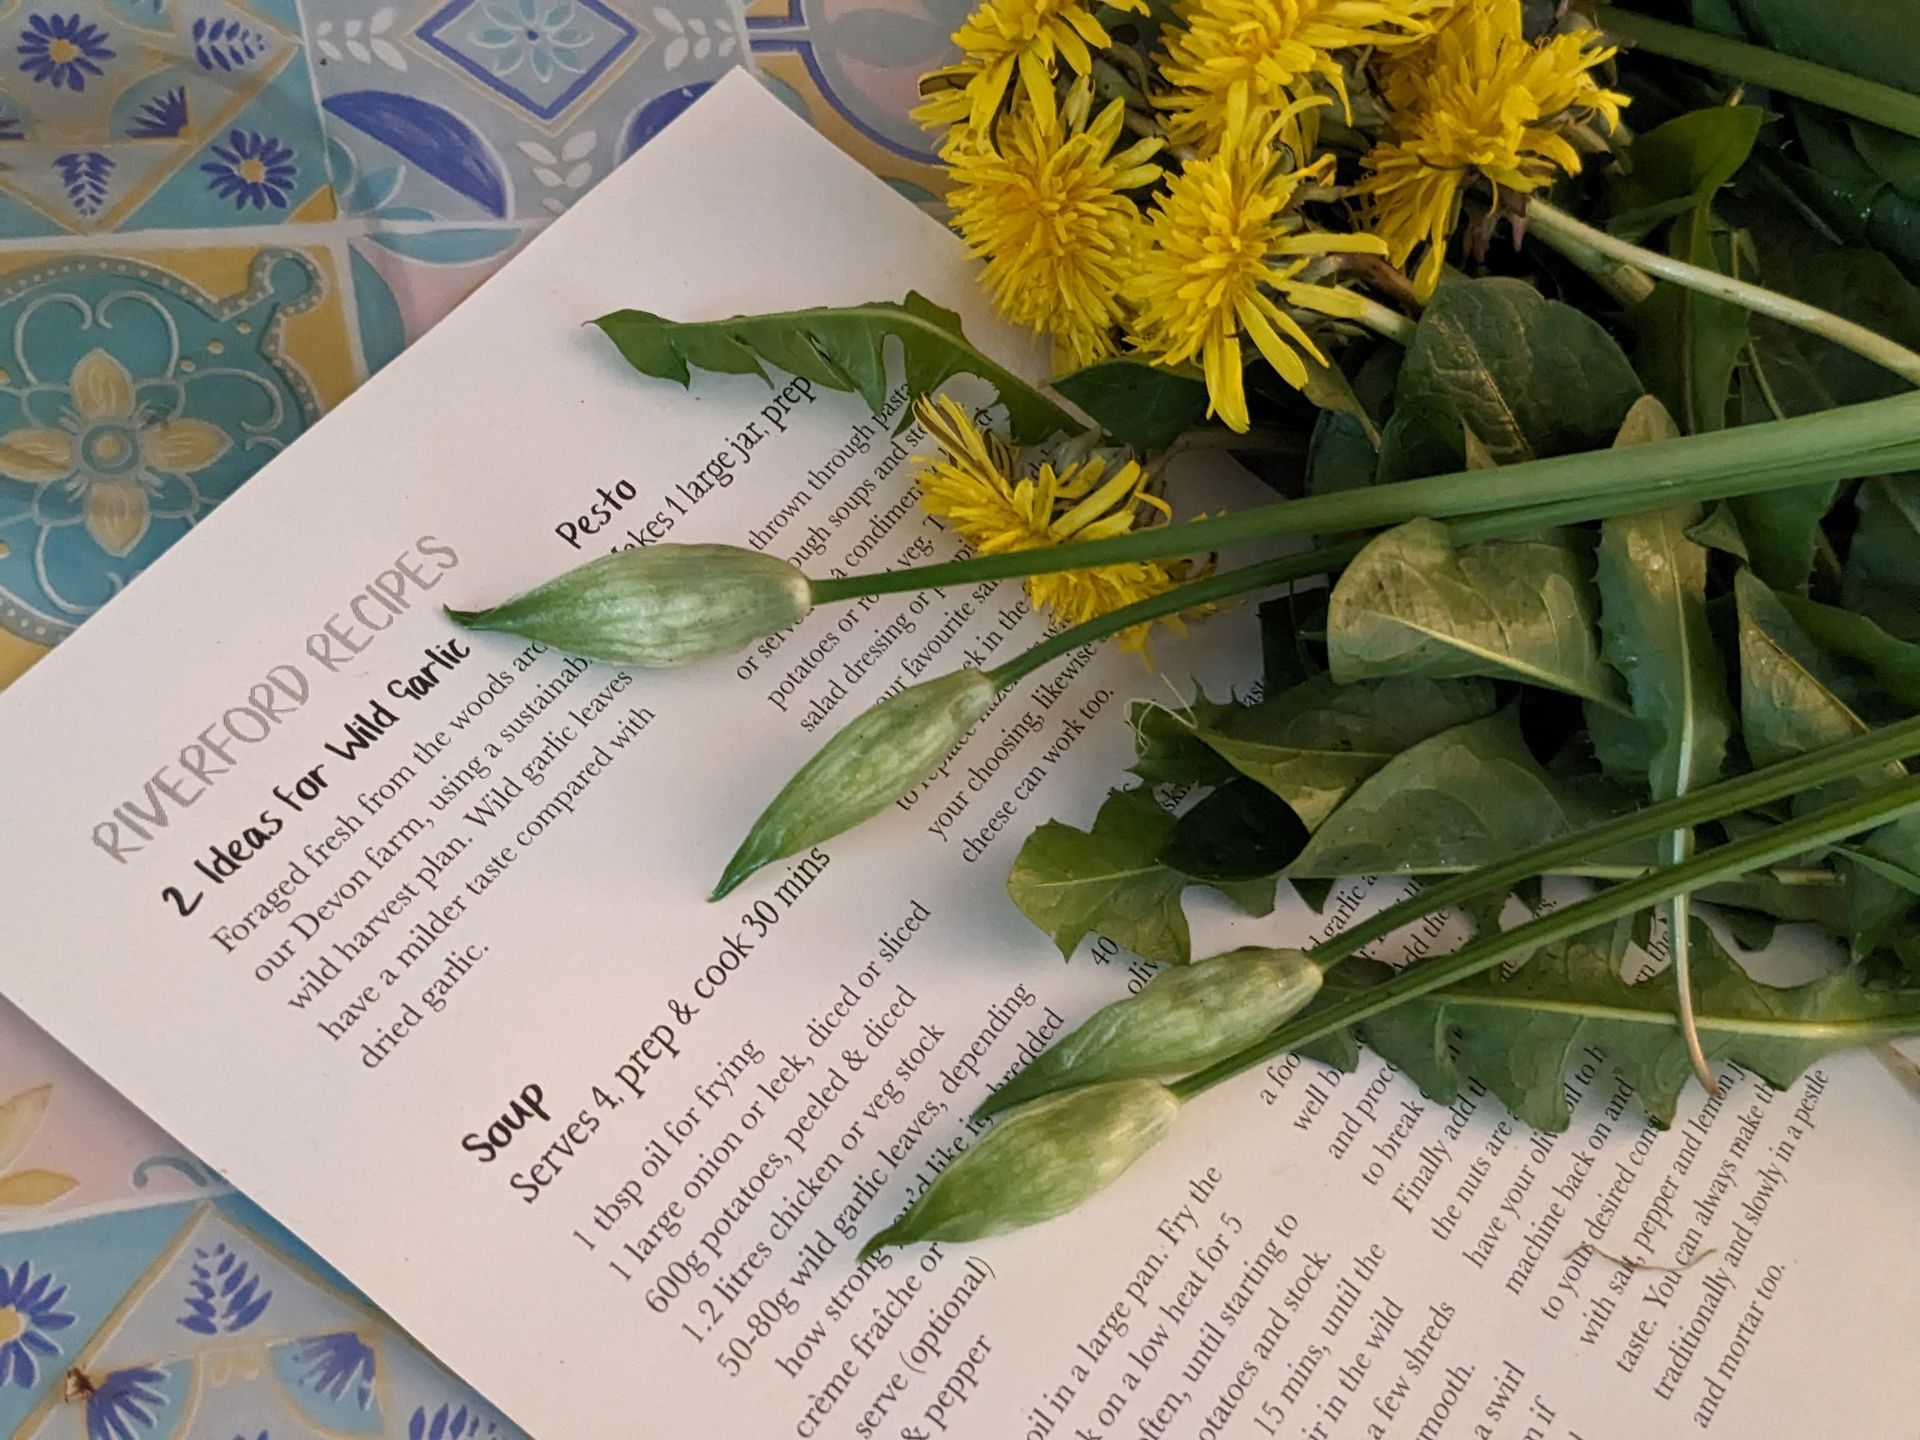 The Wonders of Wild Food by Sue Cartwright, Spiral Leaf